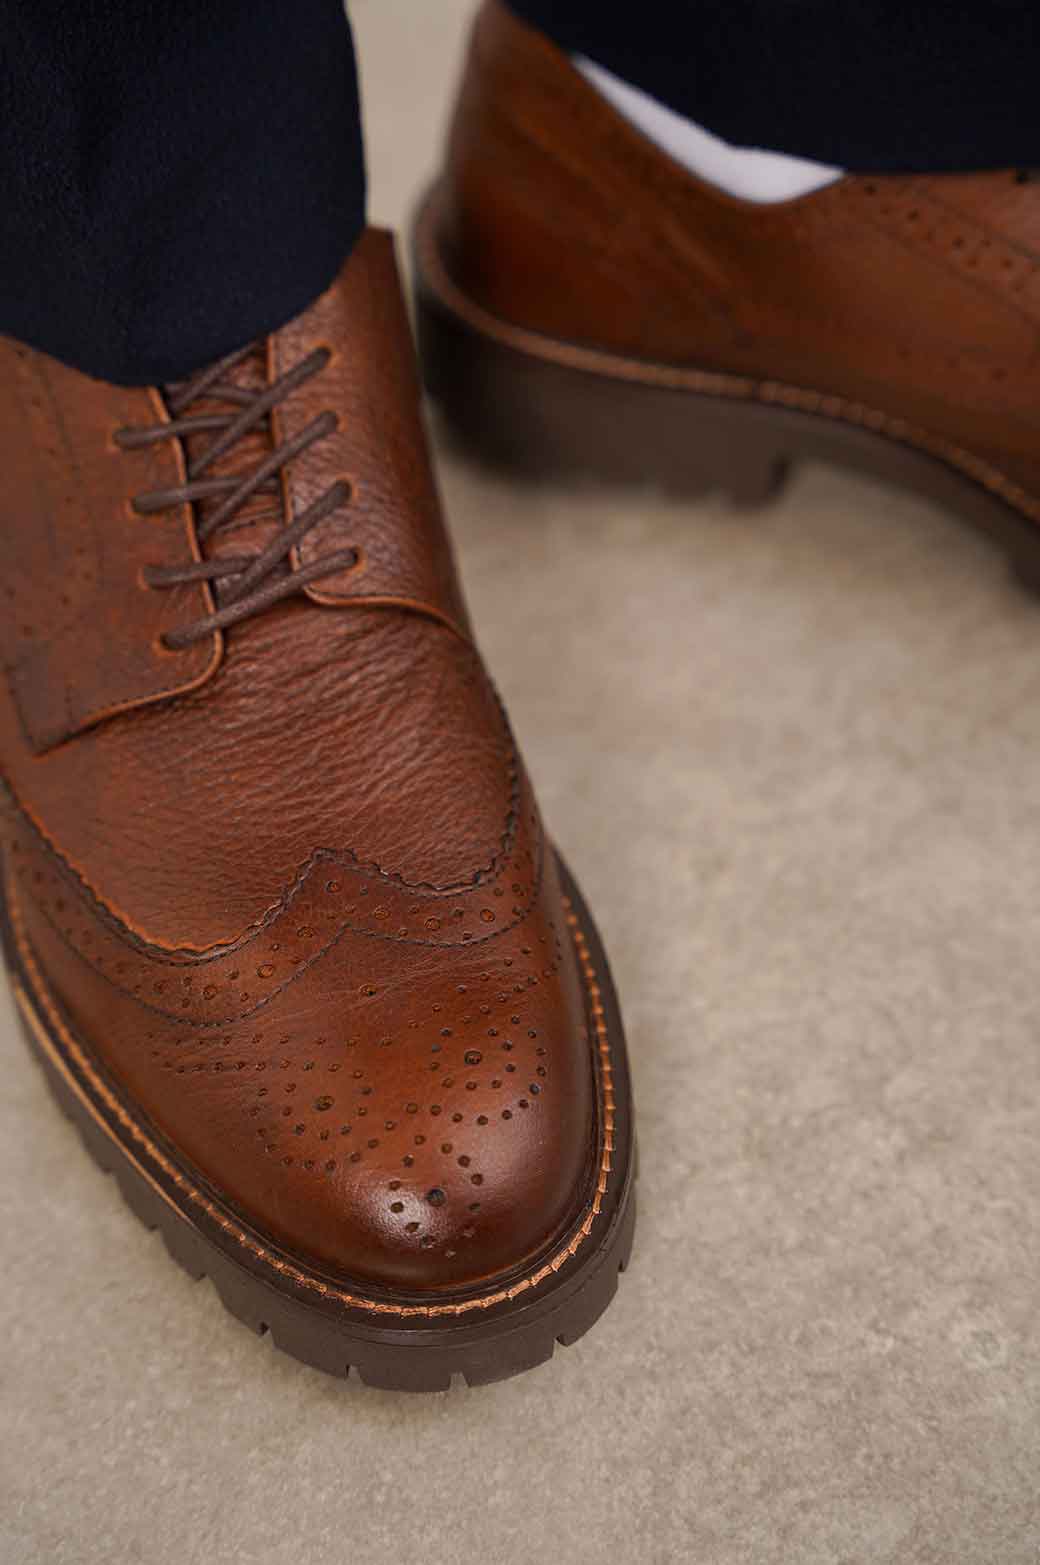 BROWN LOW-TOP LEATHER BROGUES